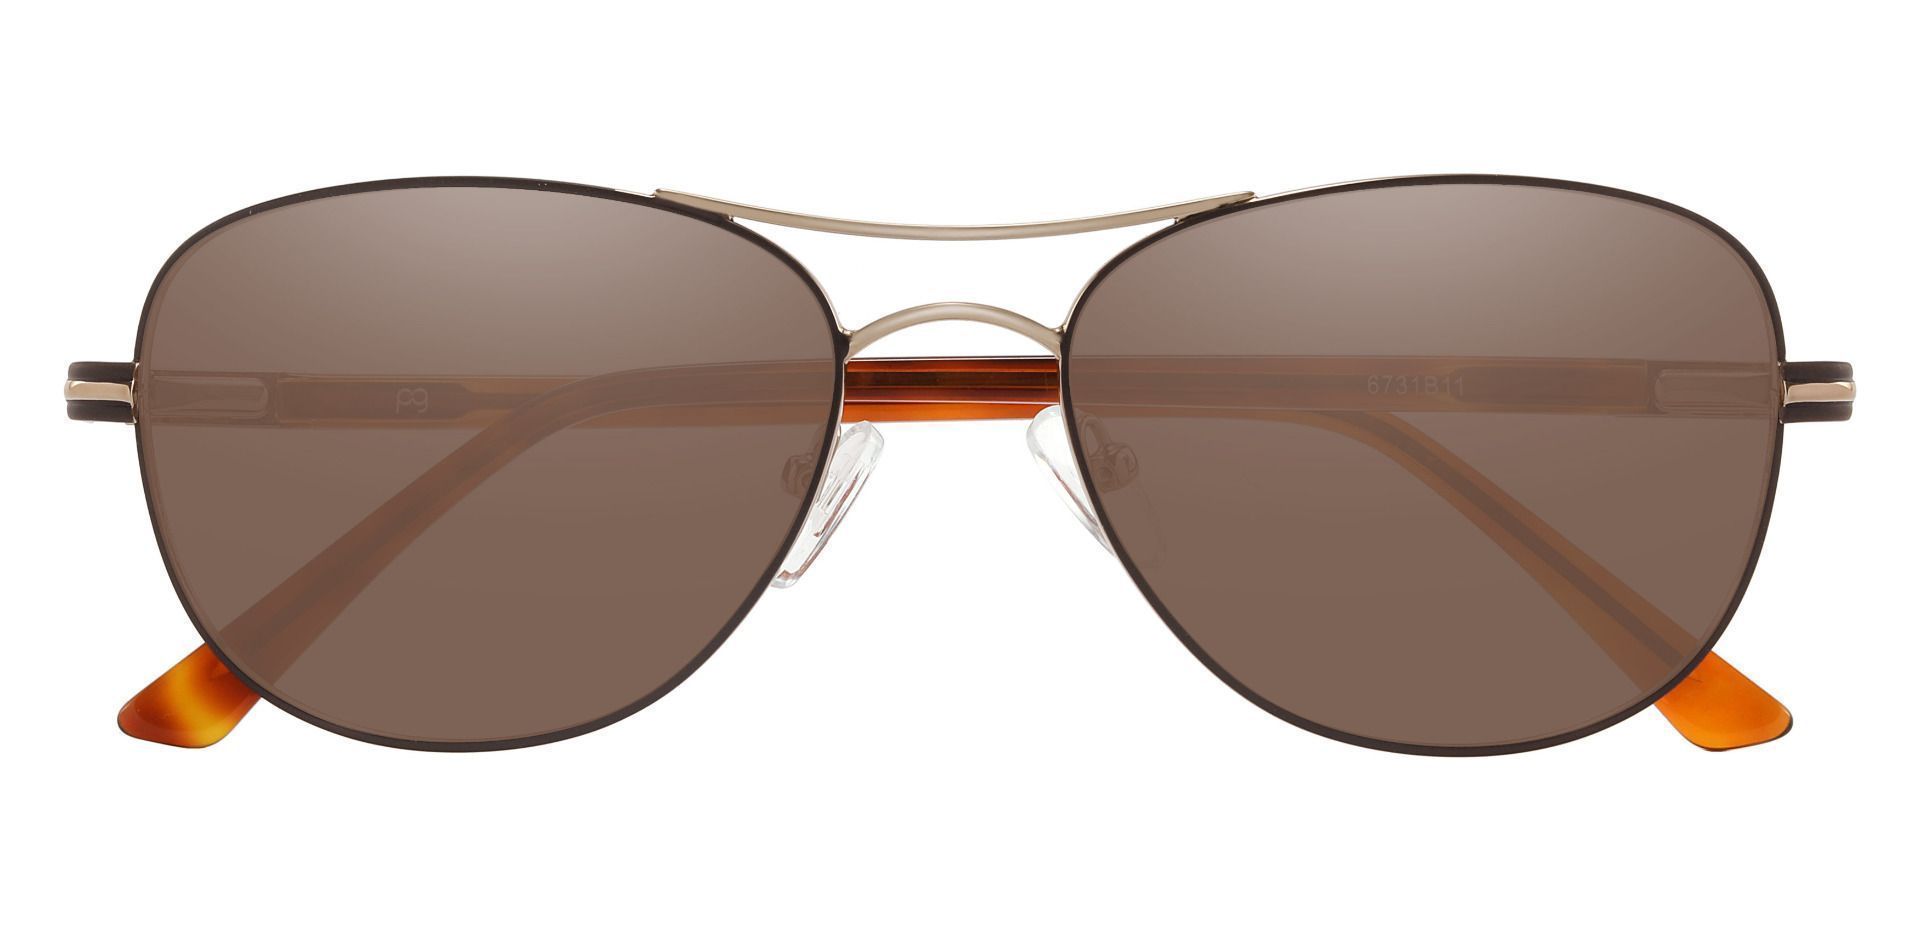 Reeves Aviator Prescription Sunglasses - Brown Frame With Brown Lenses ...